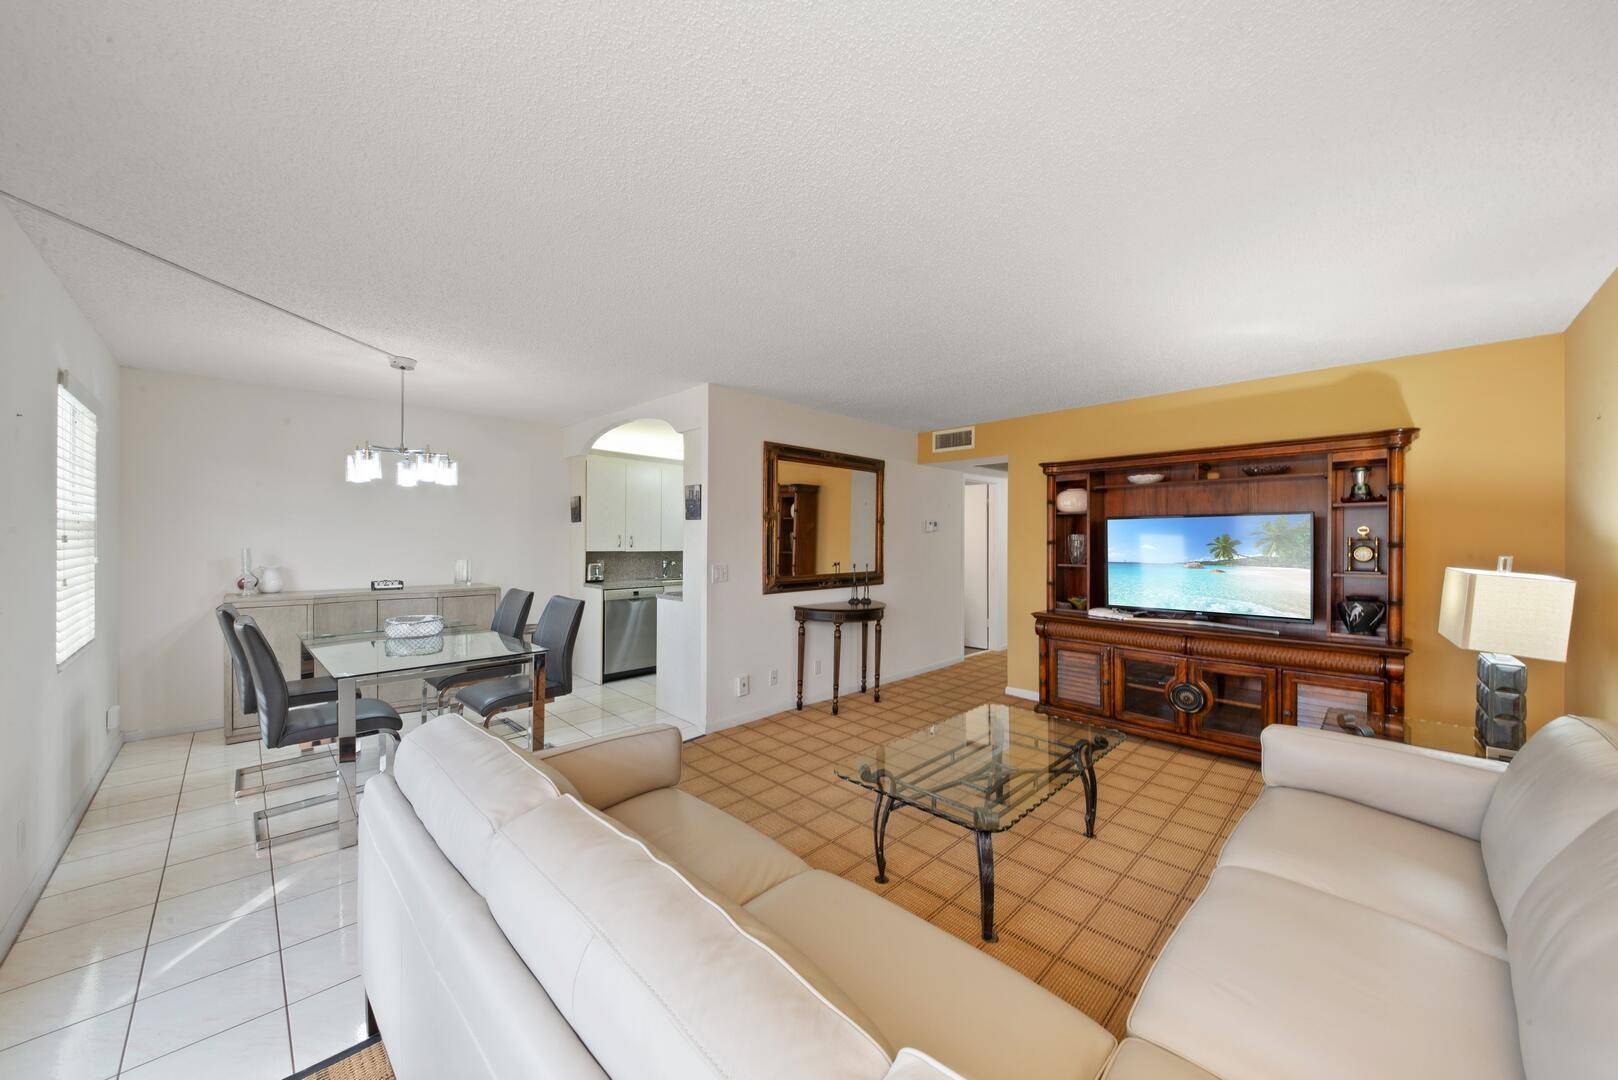 Step into your ideal sanctuary at Century Village, where contemporary luxury intertwines with everyday comfort in this stunningly renovated 2 bedroom, 1.